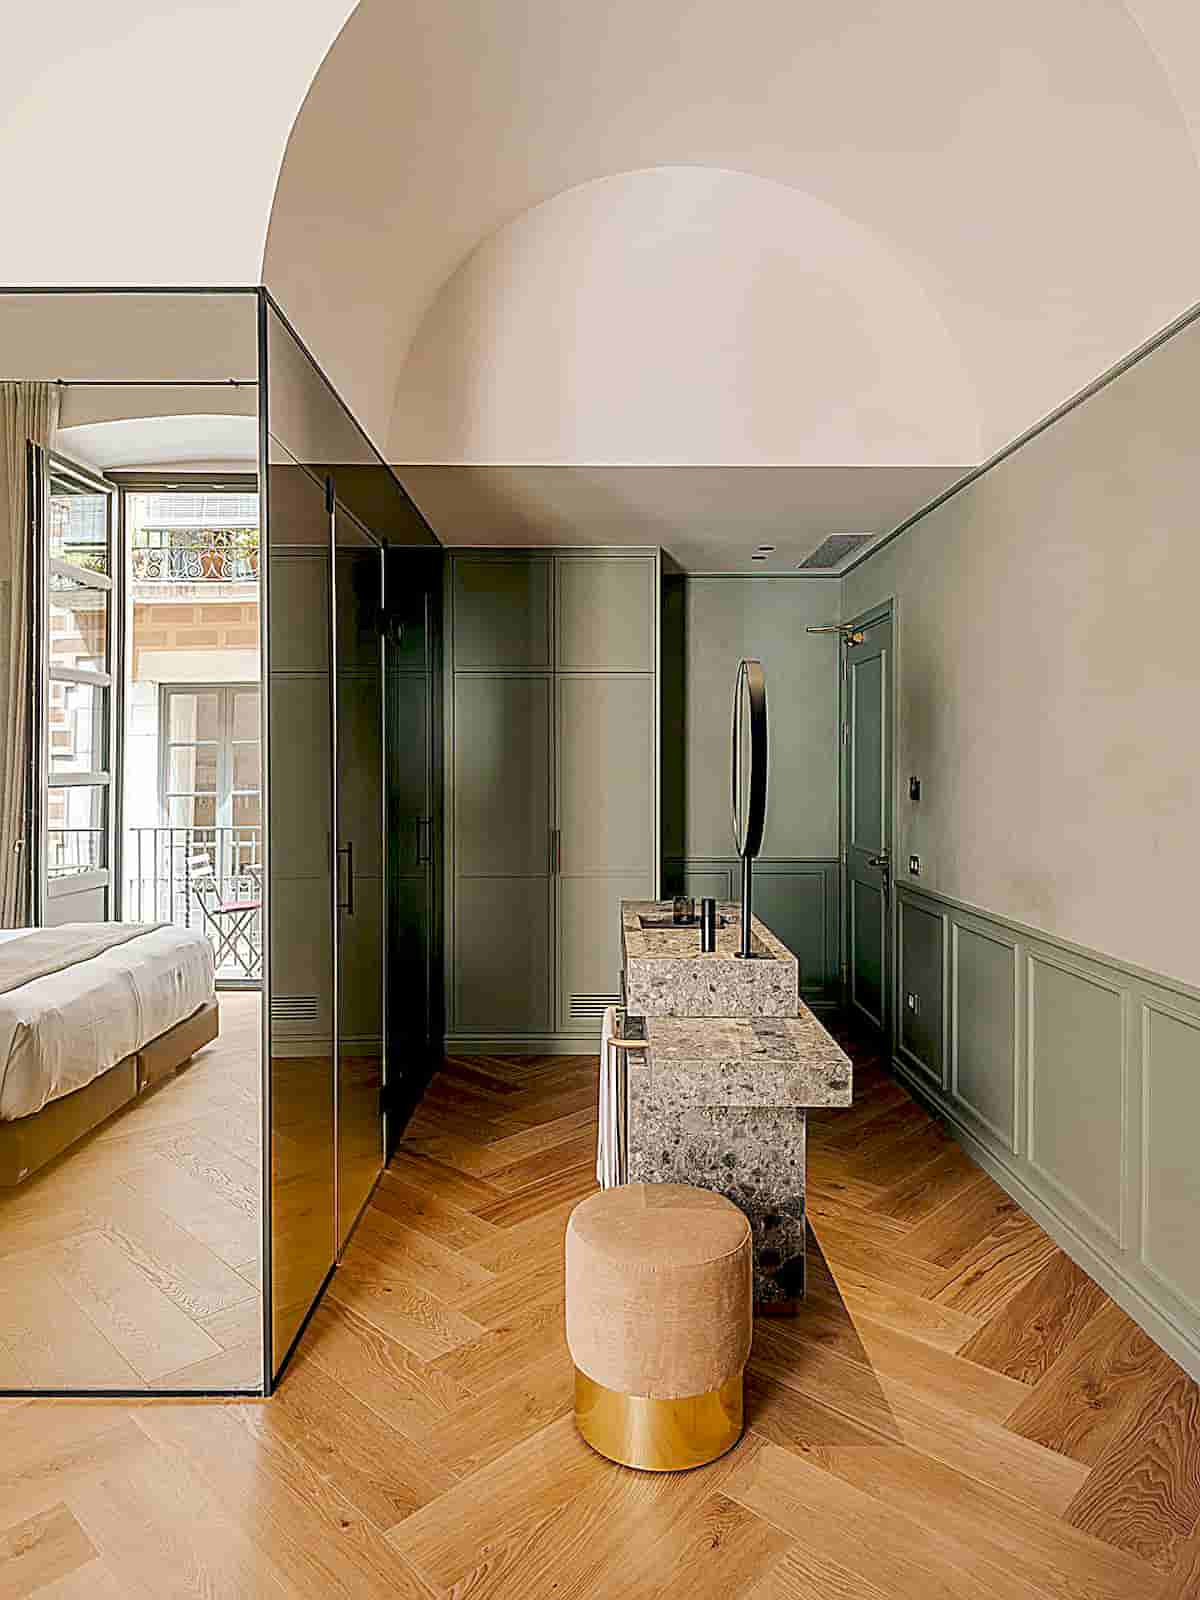 Palau Fugit A Hotel in Girona, Spain, Animates its Historic Premises with Comtemporary Art & Design